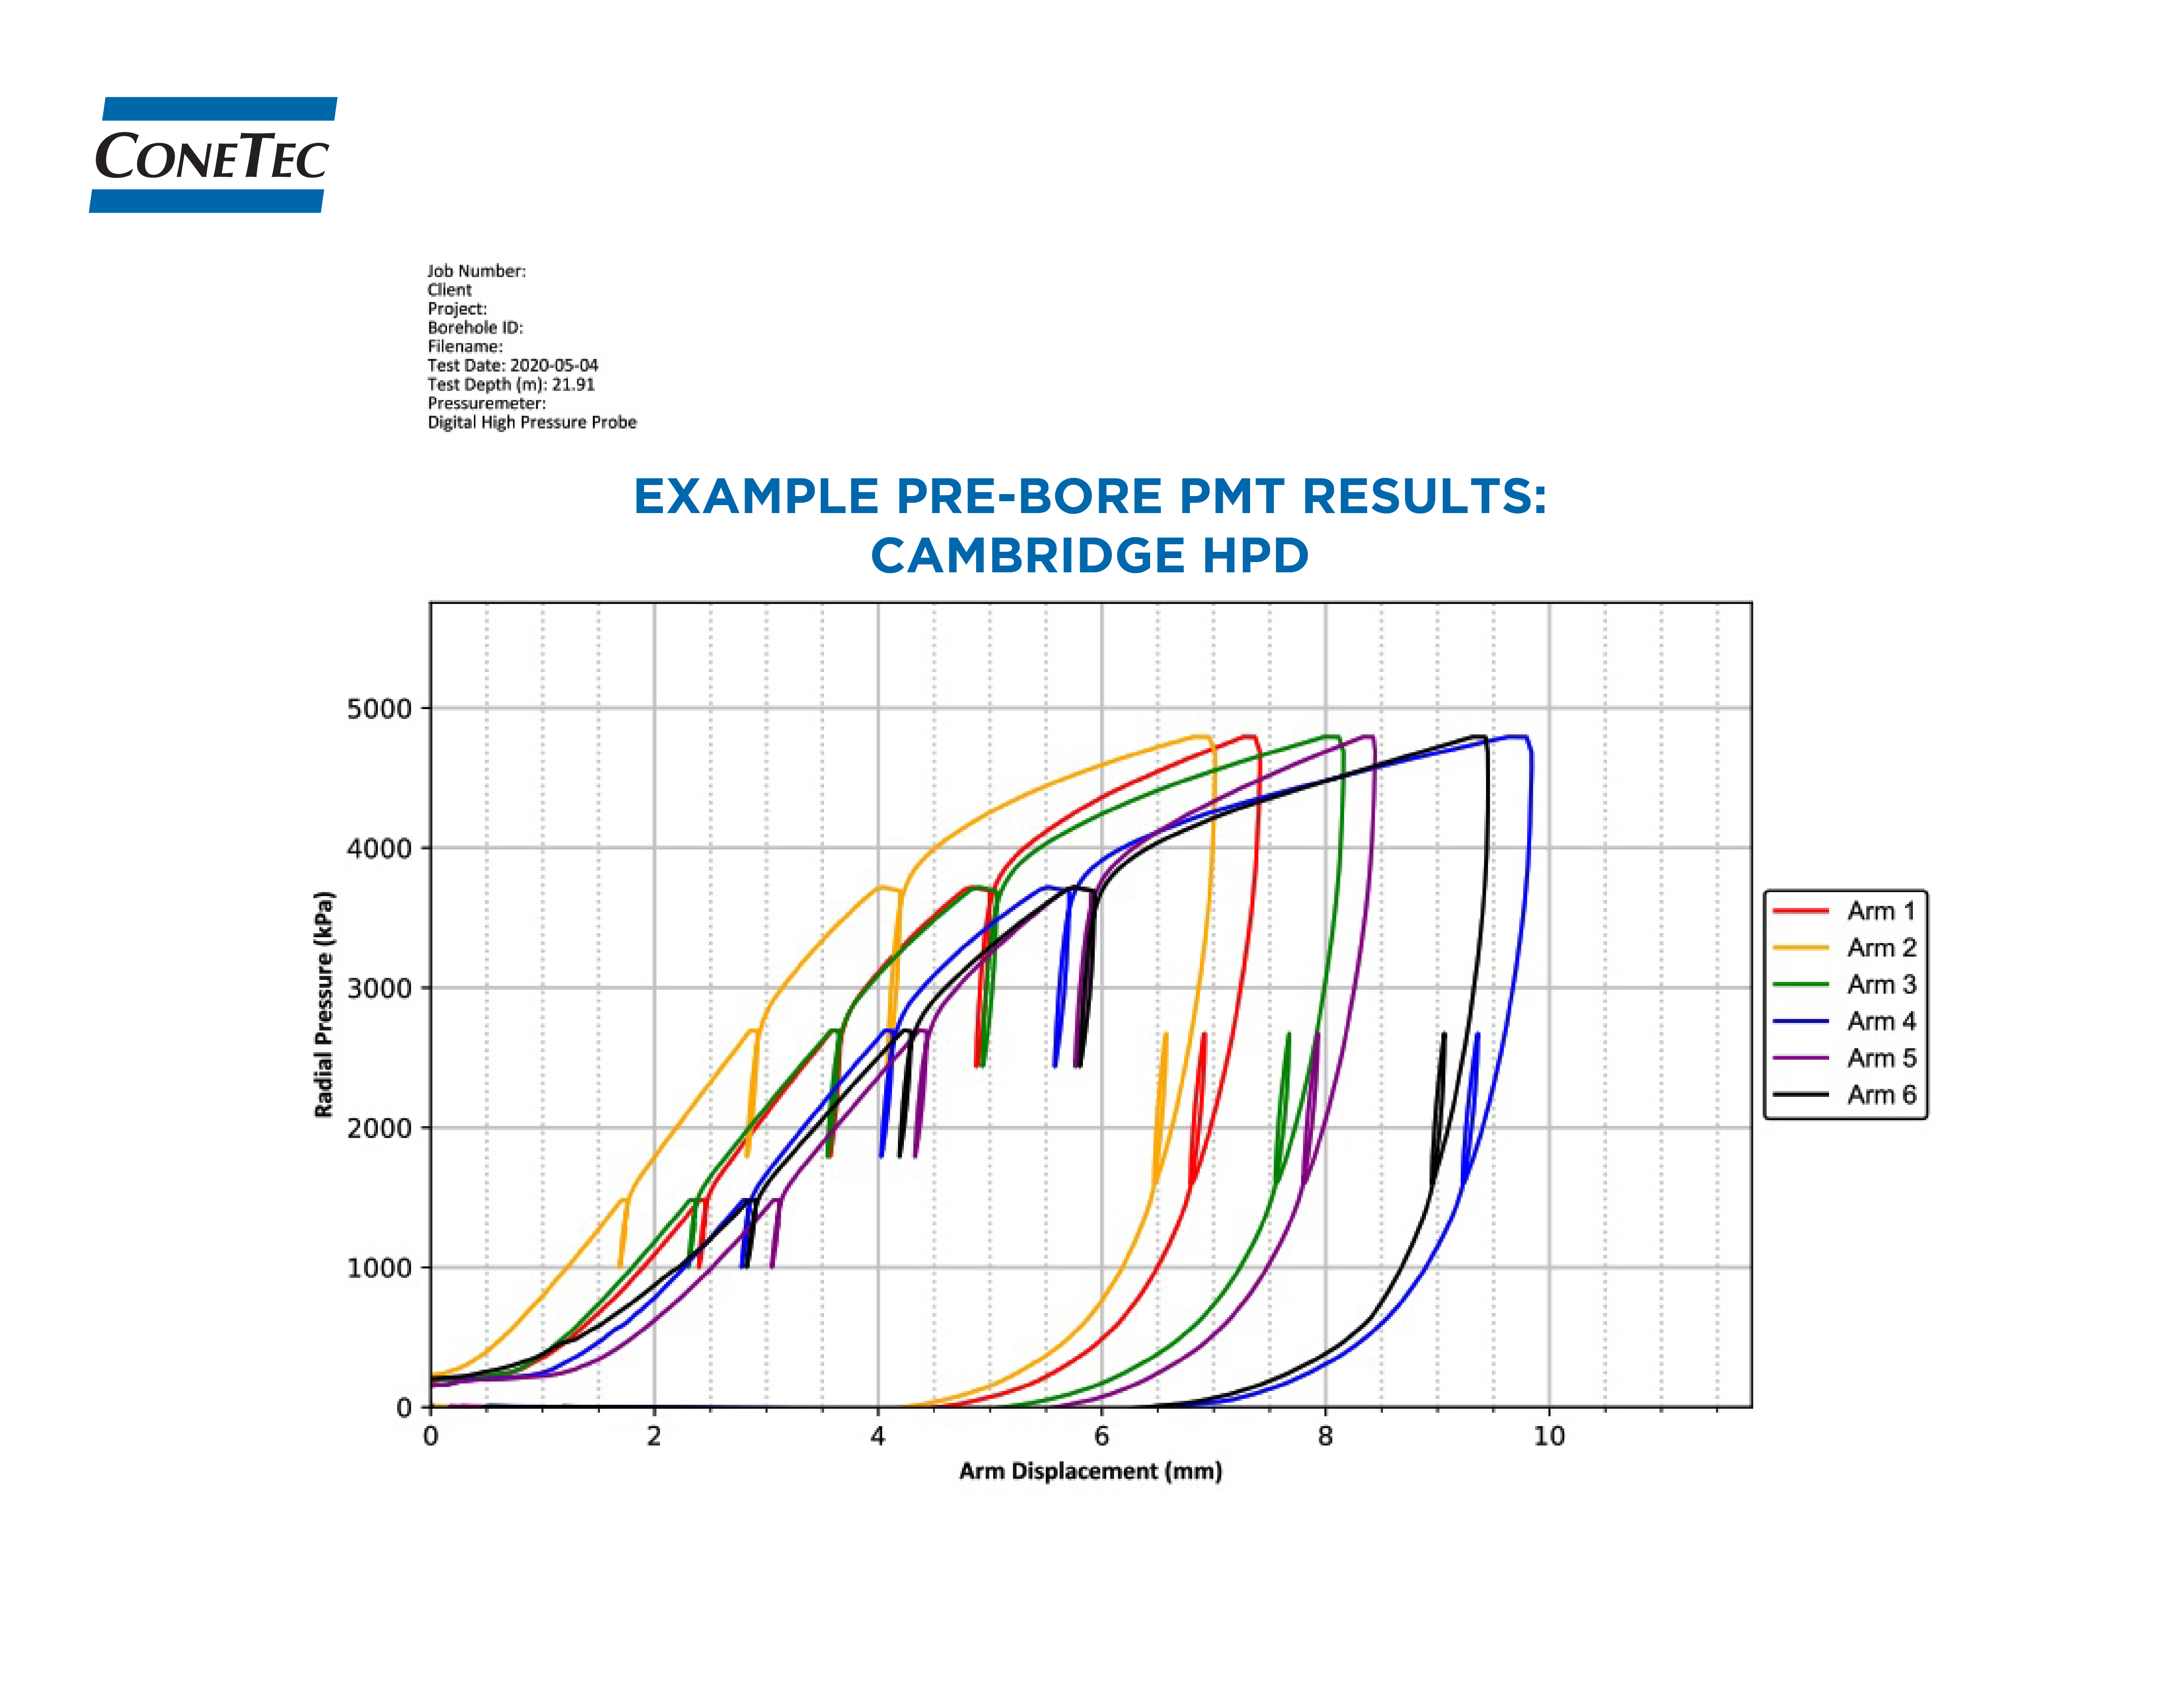 Figures and Data 2 - Example Pre-Bore PMT Results - Cambridge HPD-02.jpg